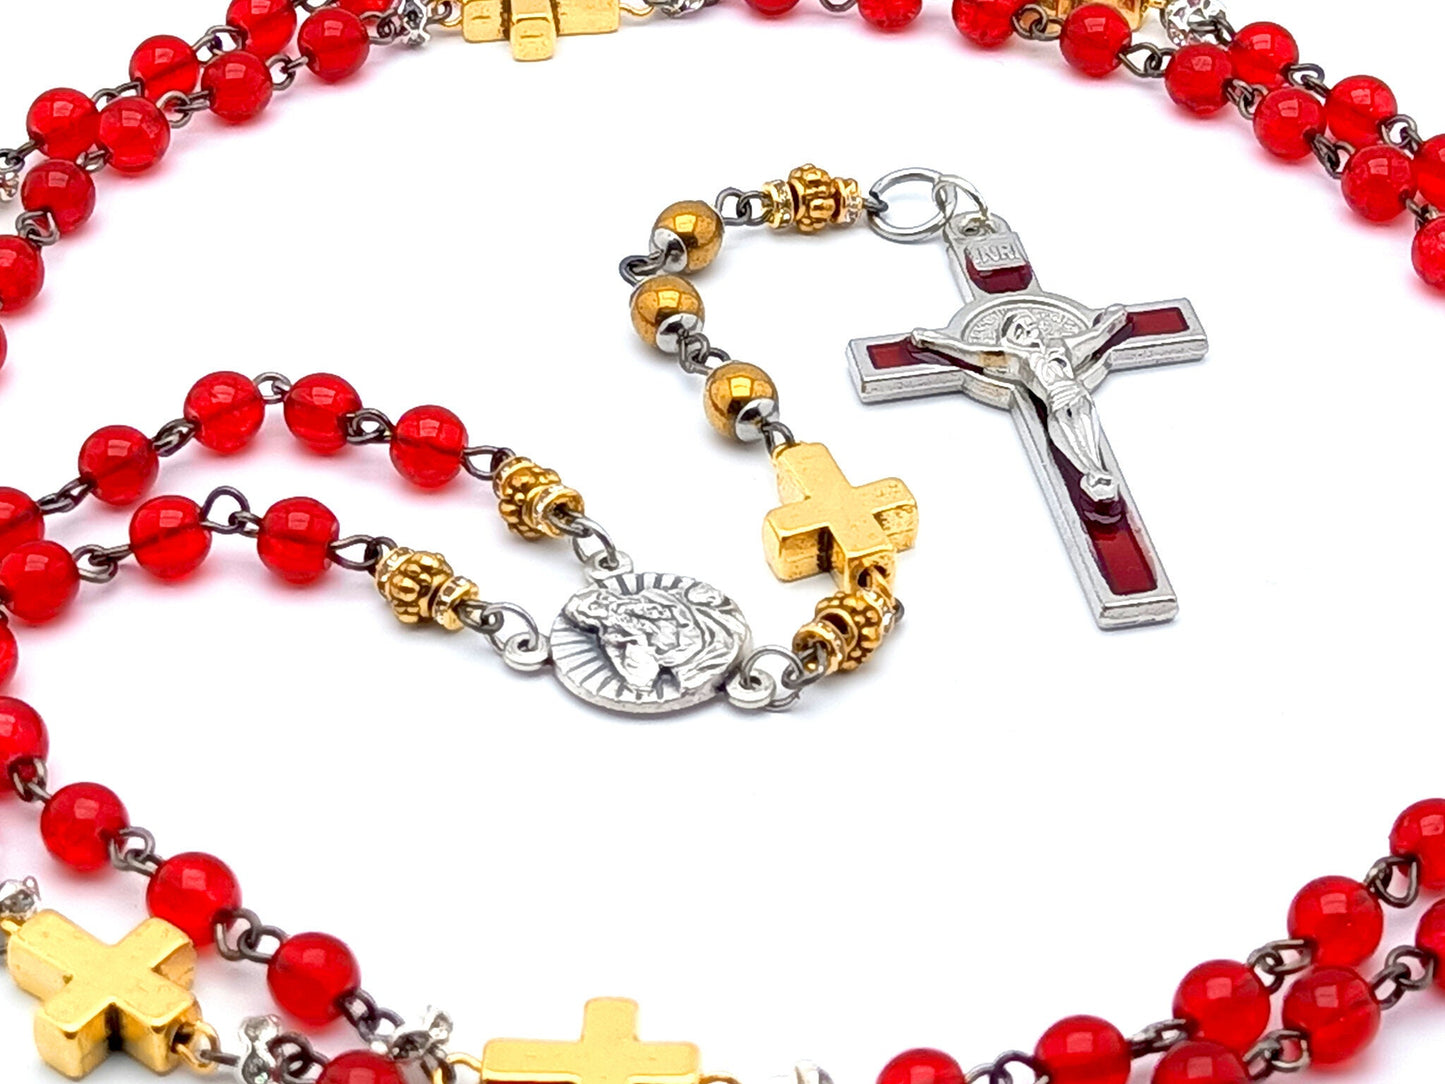 God the Father unique rosary beads prayer chaplet with red glass and gold beads, red enamel and silver crucifix and centre medal.